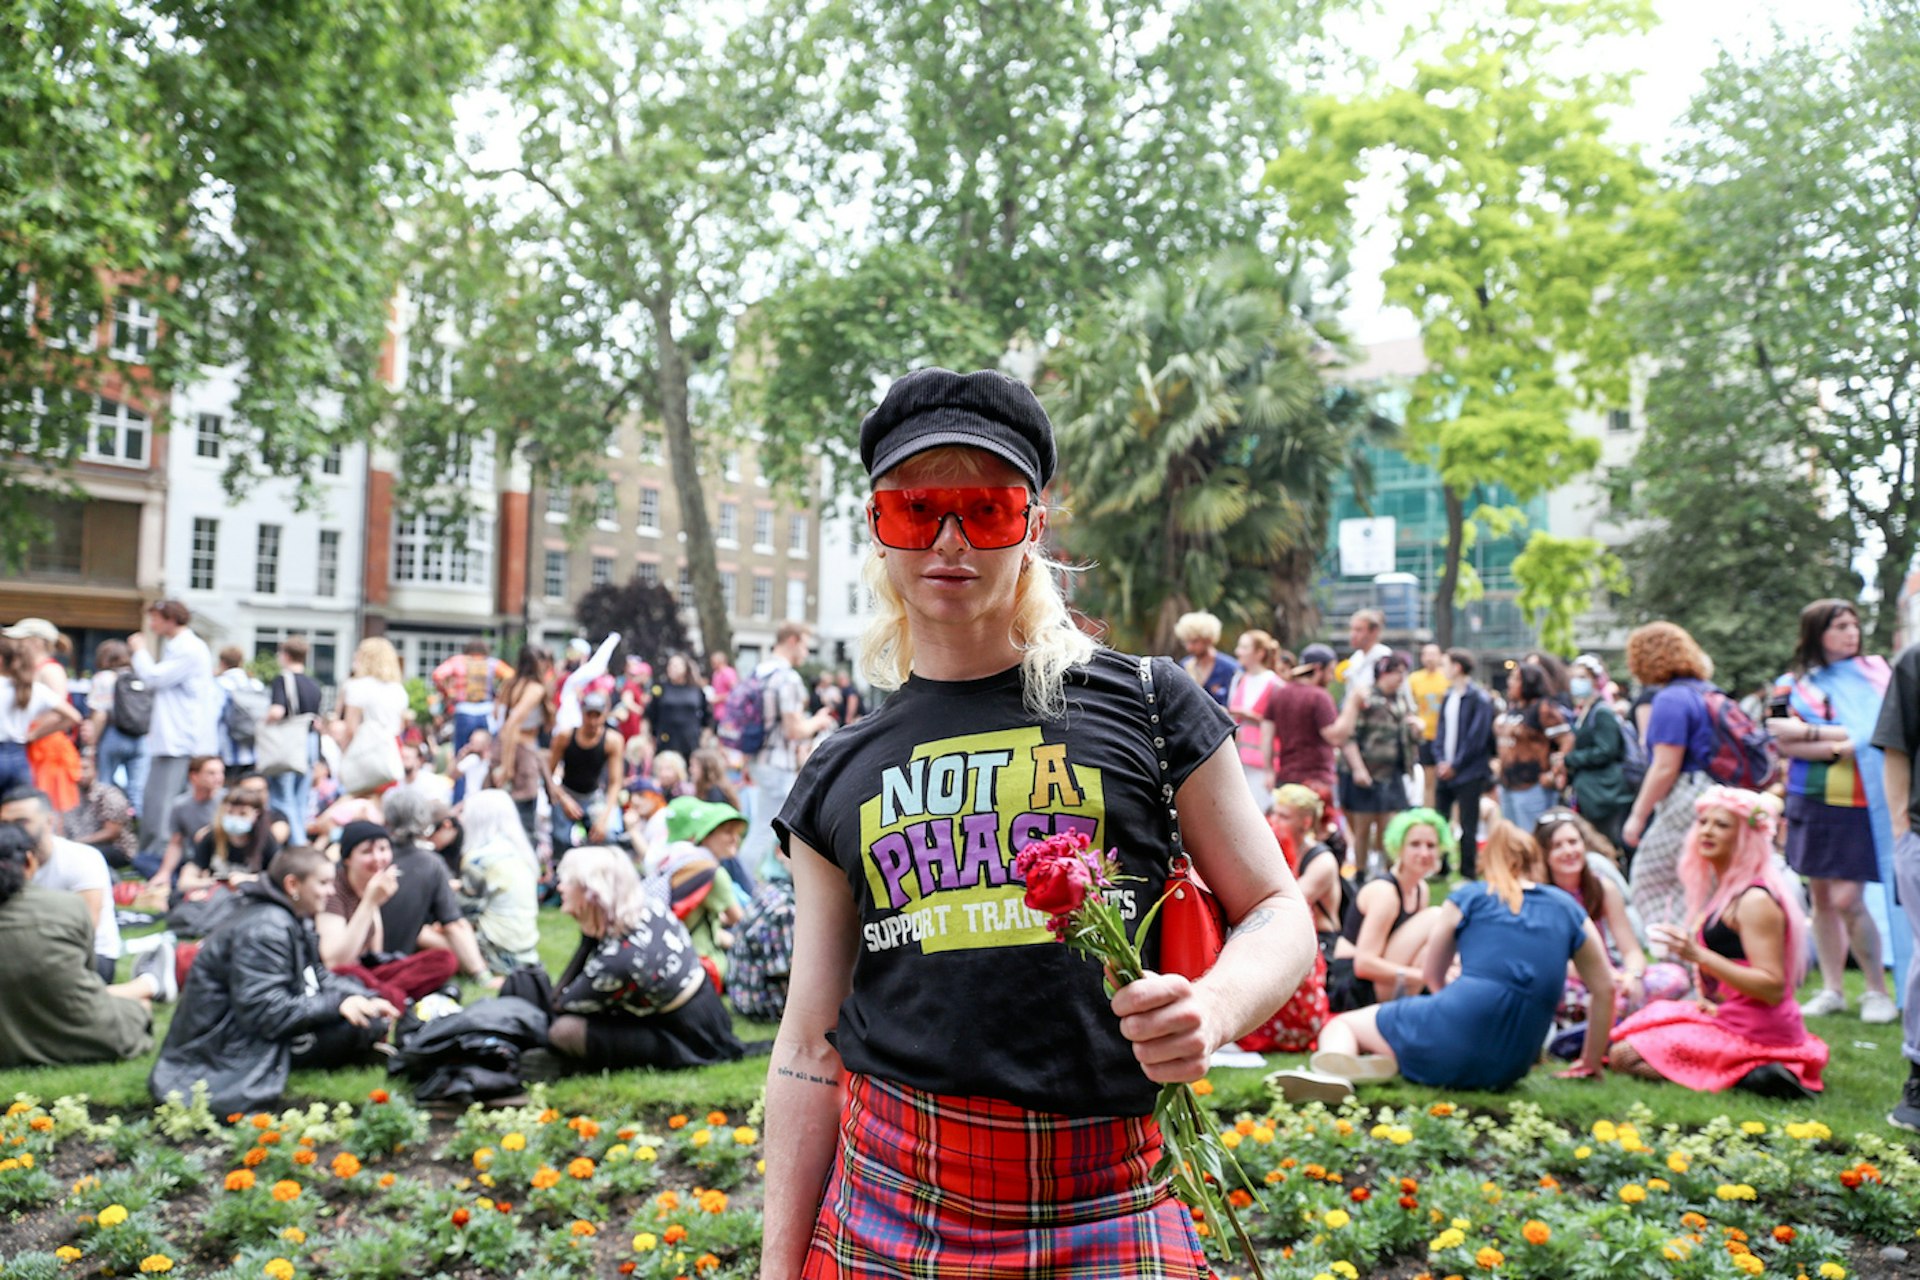 Photos from London’s joyous & defiant Trans+ Pride march